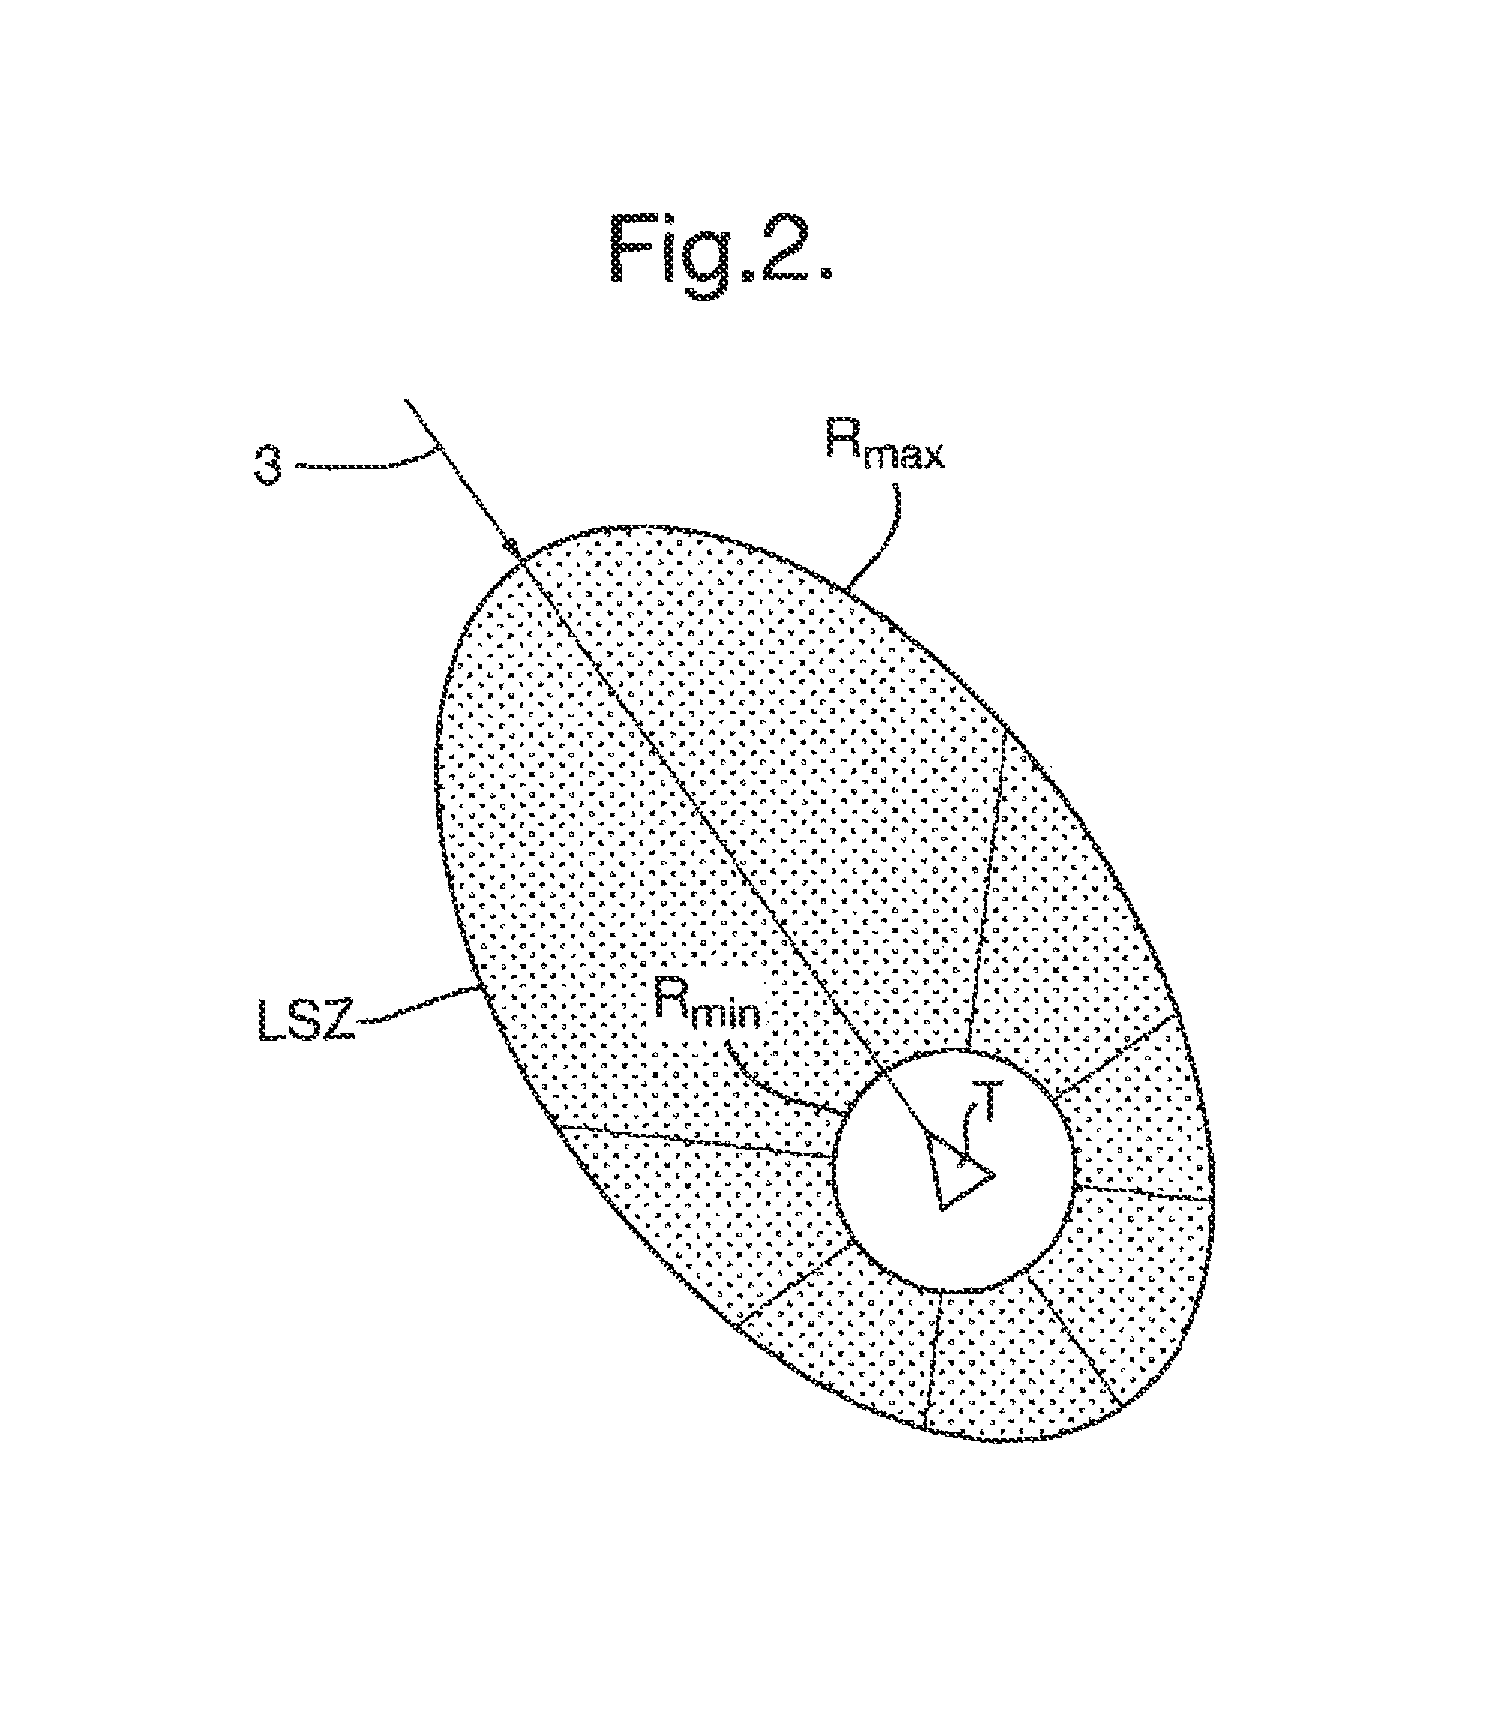 System integration for feasibility display